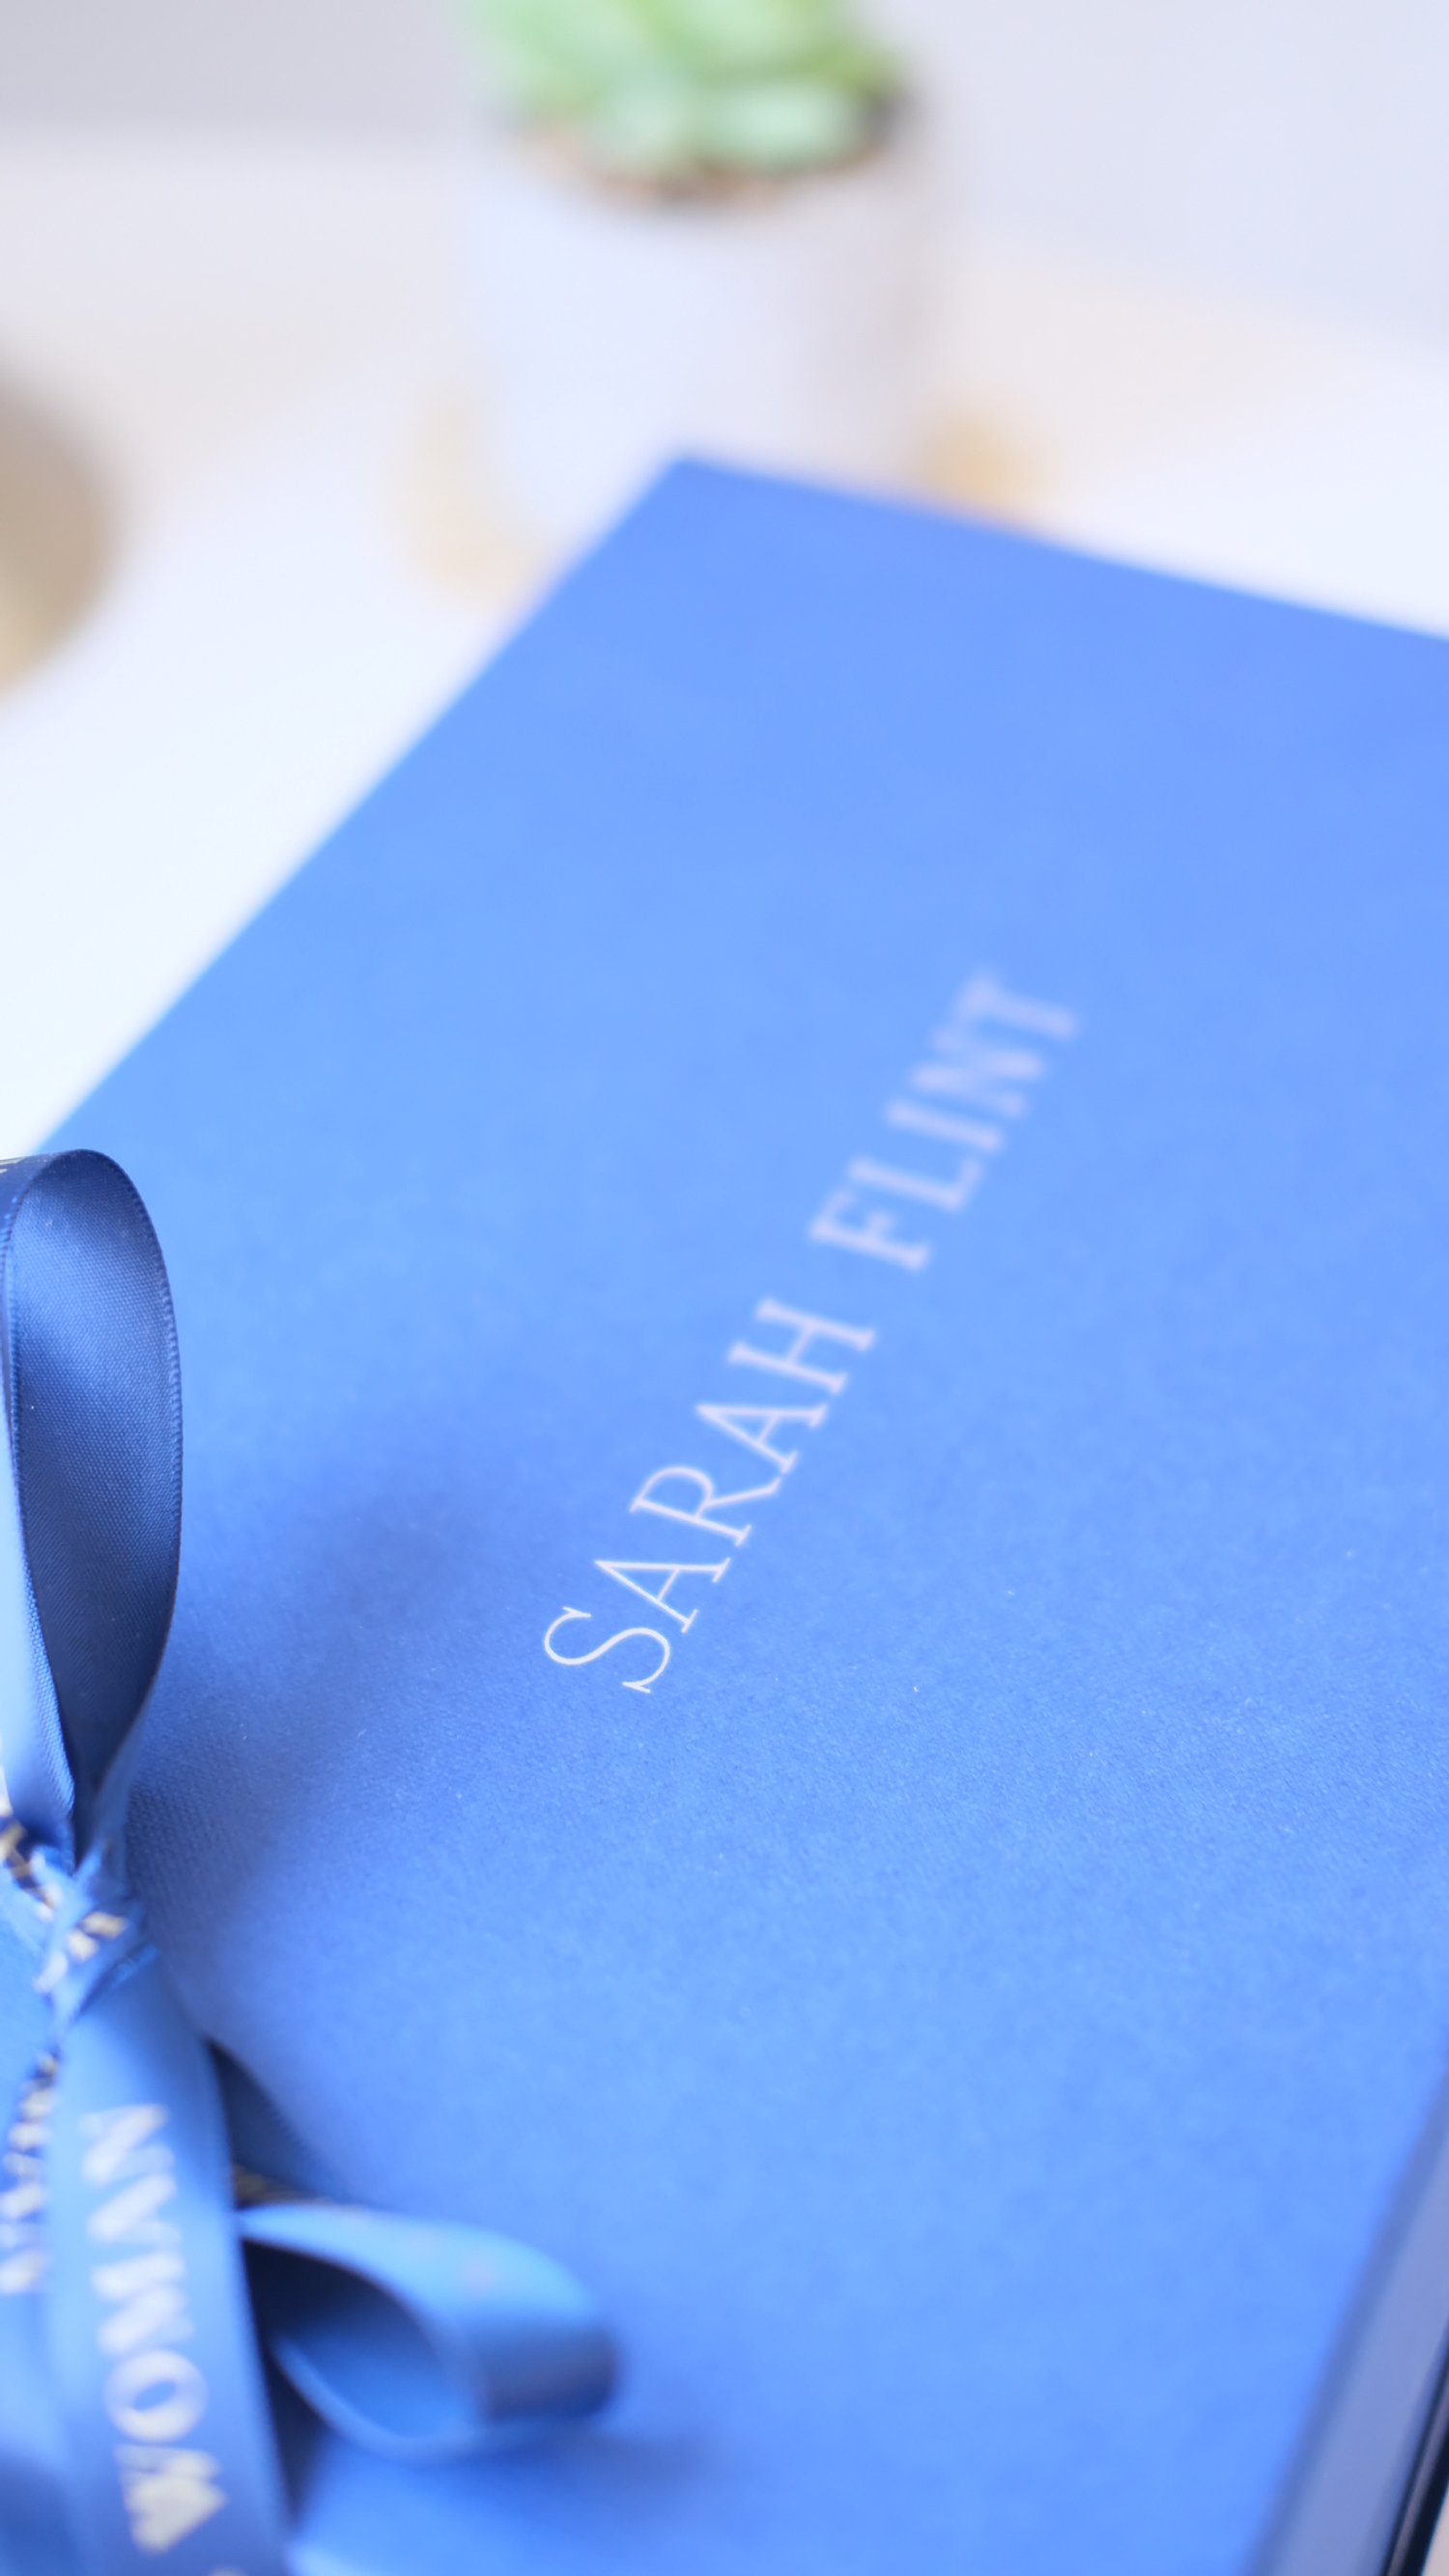 In this honest Sarah Flint Review, you will find my Sarah Flint shoes review. I heard so much about Sarah Flint shoes before finally getting my own pair of Sarah Flint sandals. The best thing about this Sarah Flint review? There’s a Sarah Flint disco